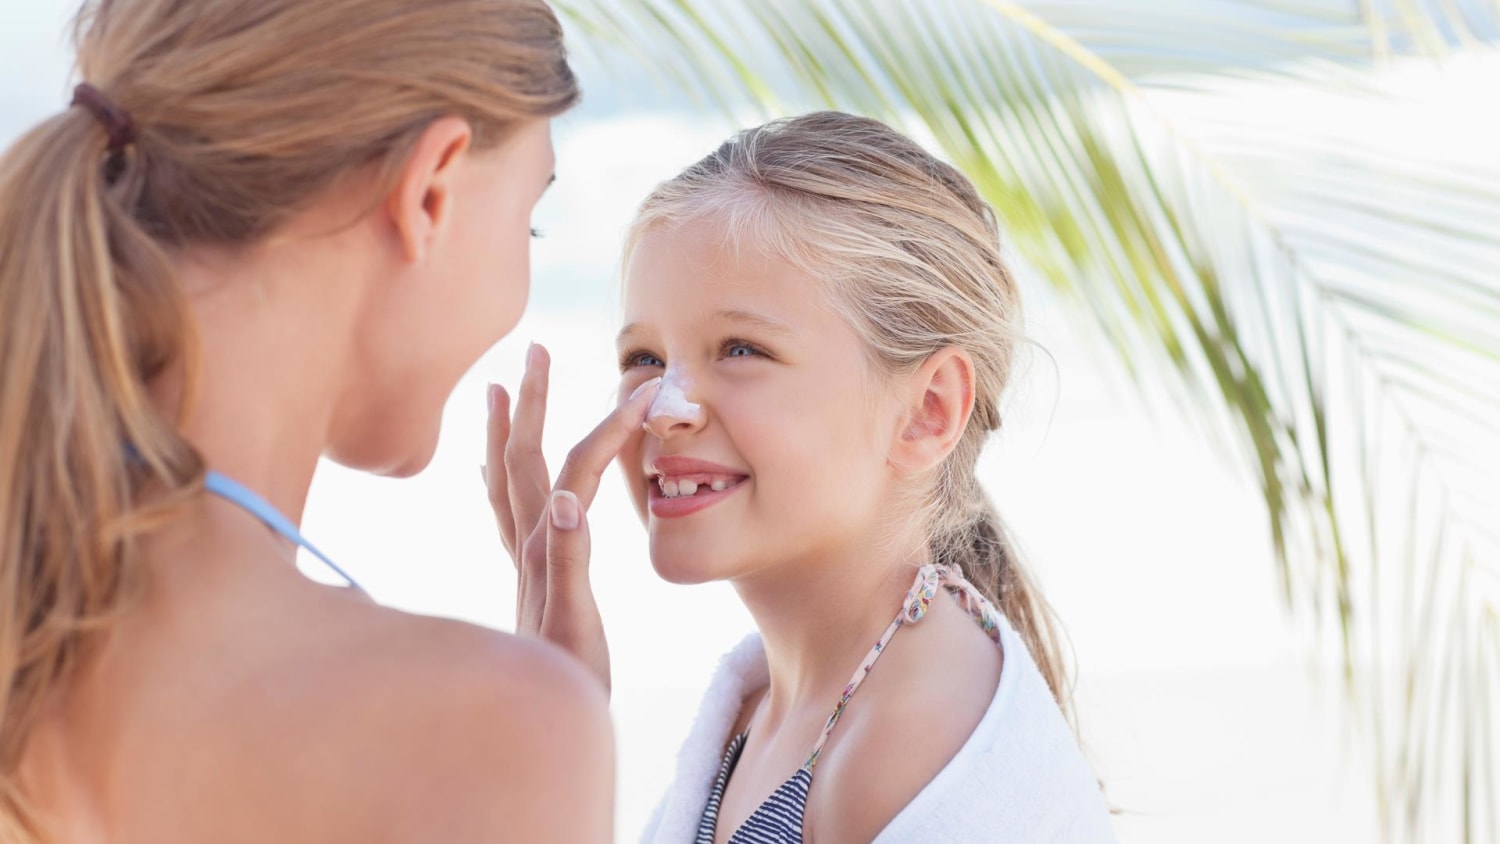 Sunscreen Savvy: A Brighter Future for Your Skin